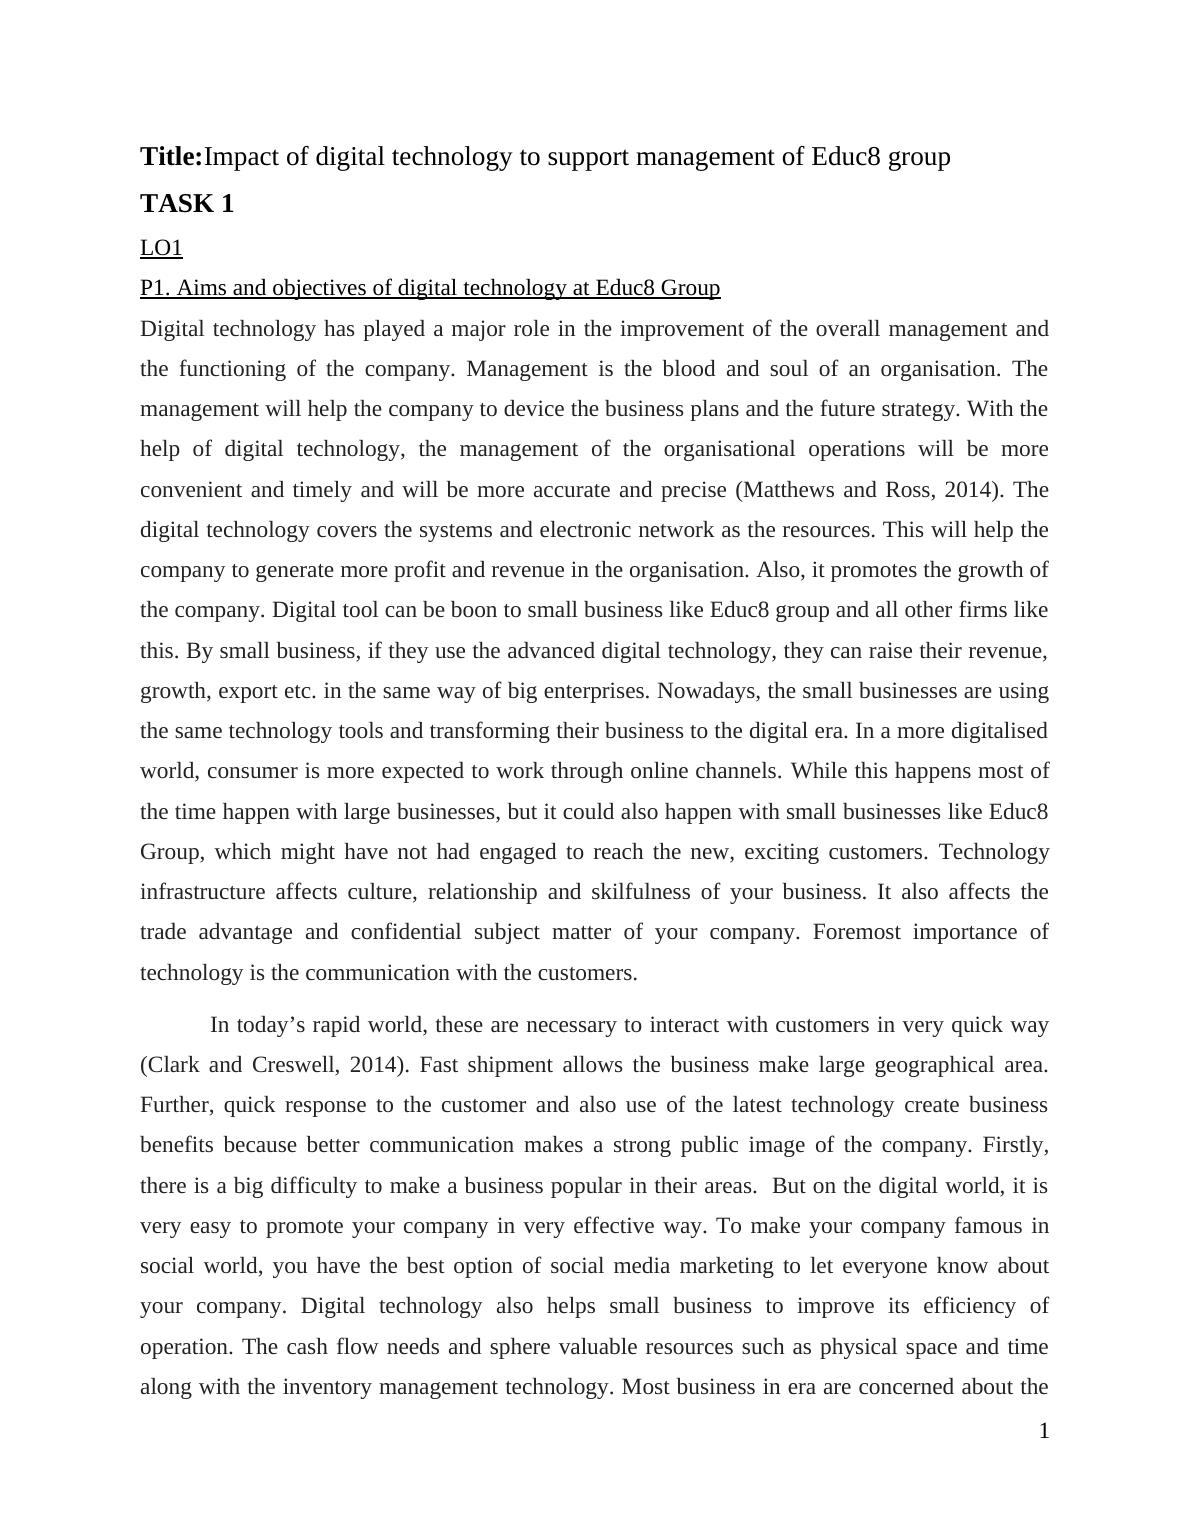 Impact of Digital Technology to Support Management of Edu8 Group : Report_3